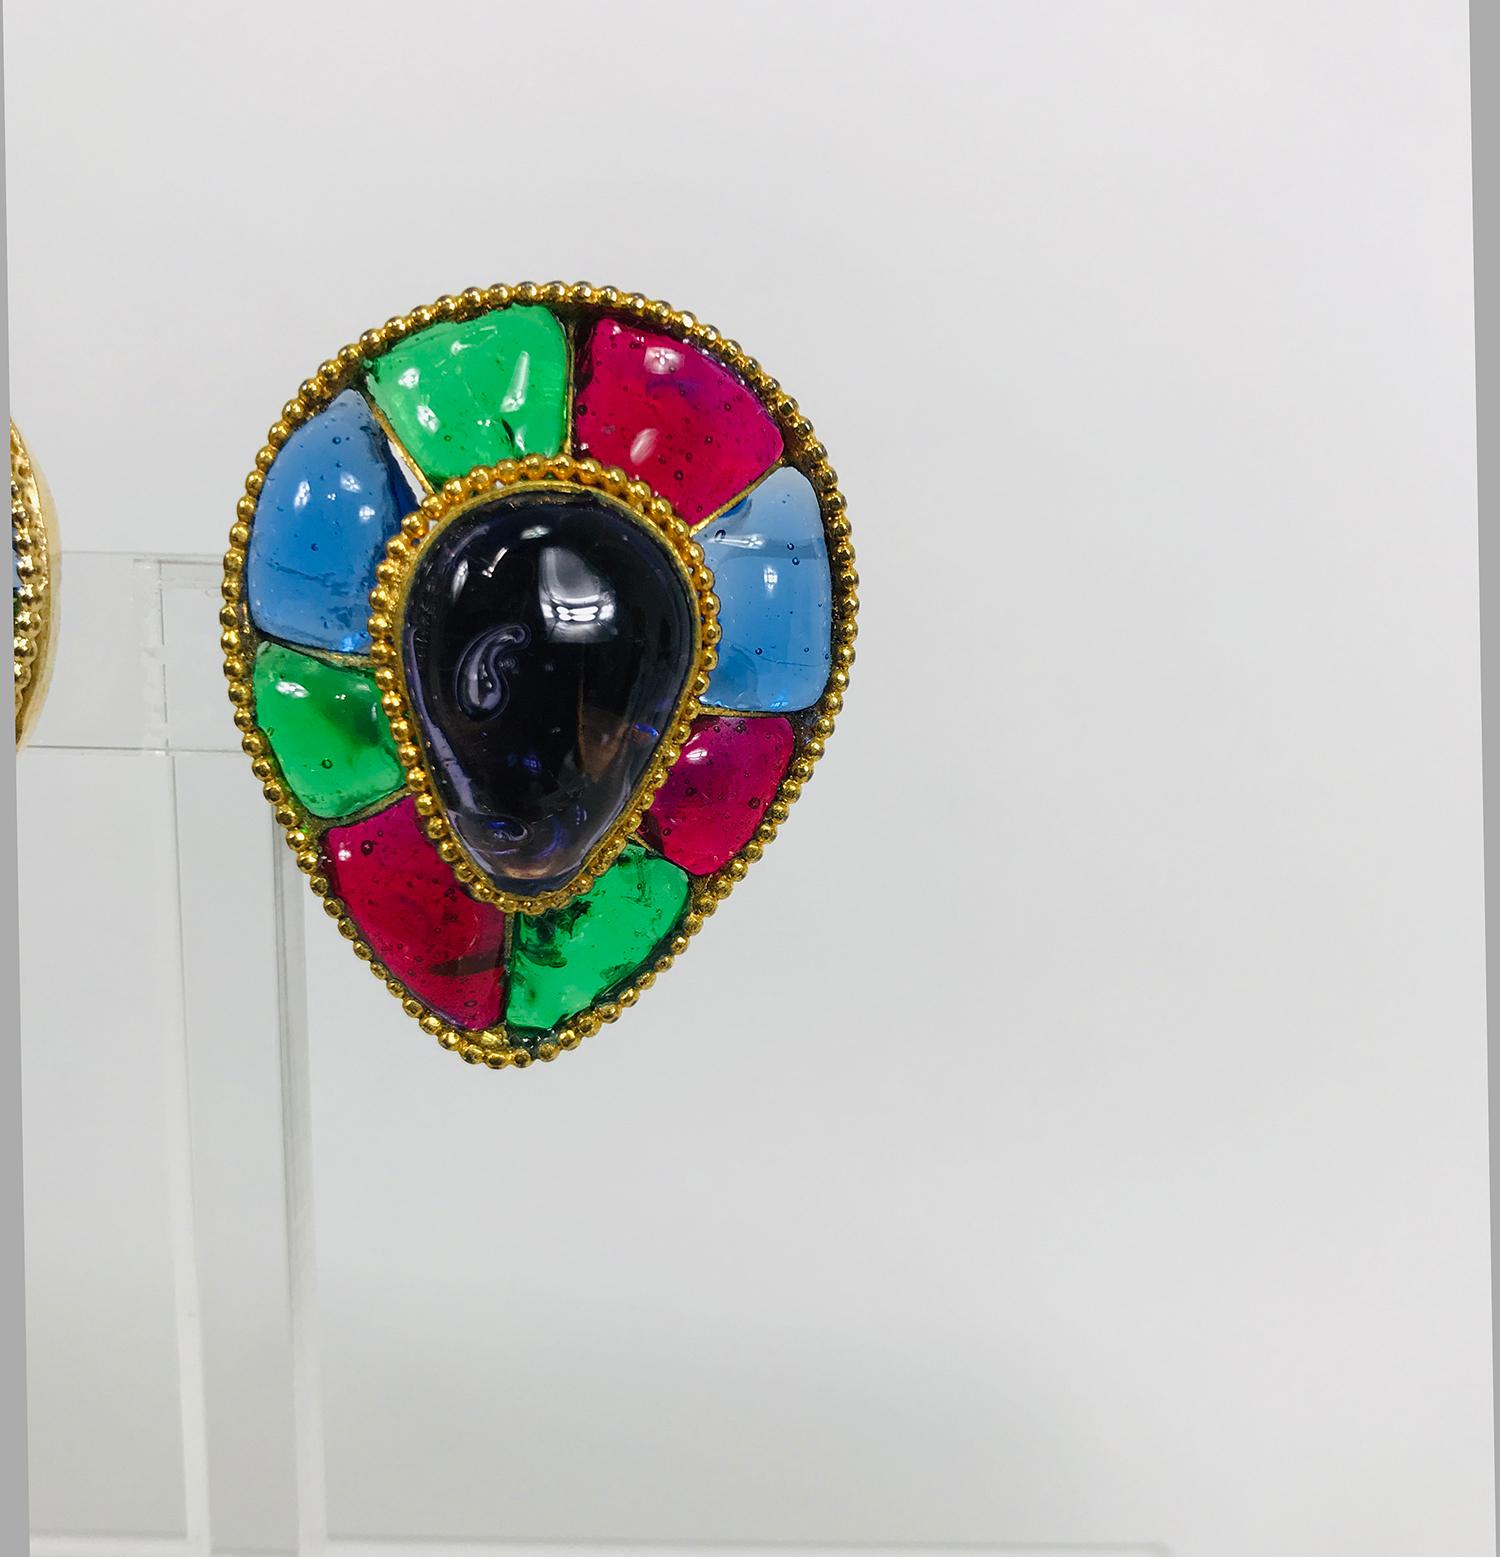 Chanel Season 26, large Gripoix reverse teardrop earrings in blue, green & red glass.  Designed by Victoire de Castallane 1986. Beaded gold bezel, the center holds a large blue glass reverse teardrop shape, the outer edge is surrounded with